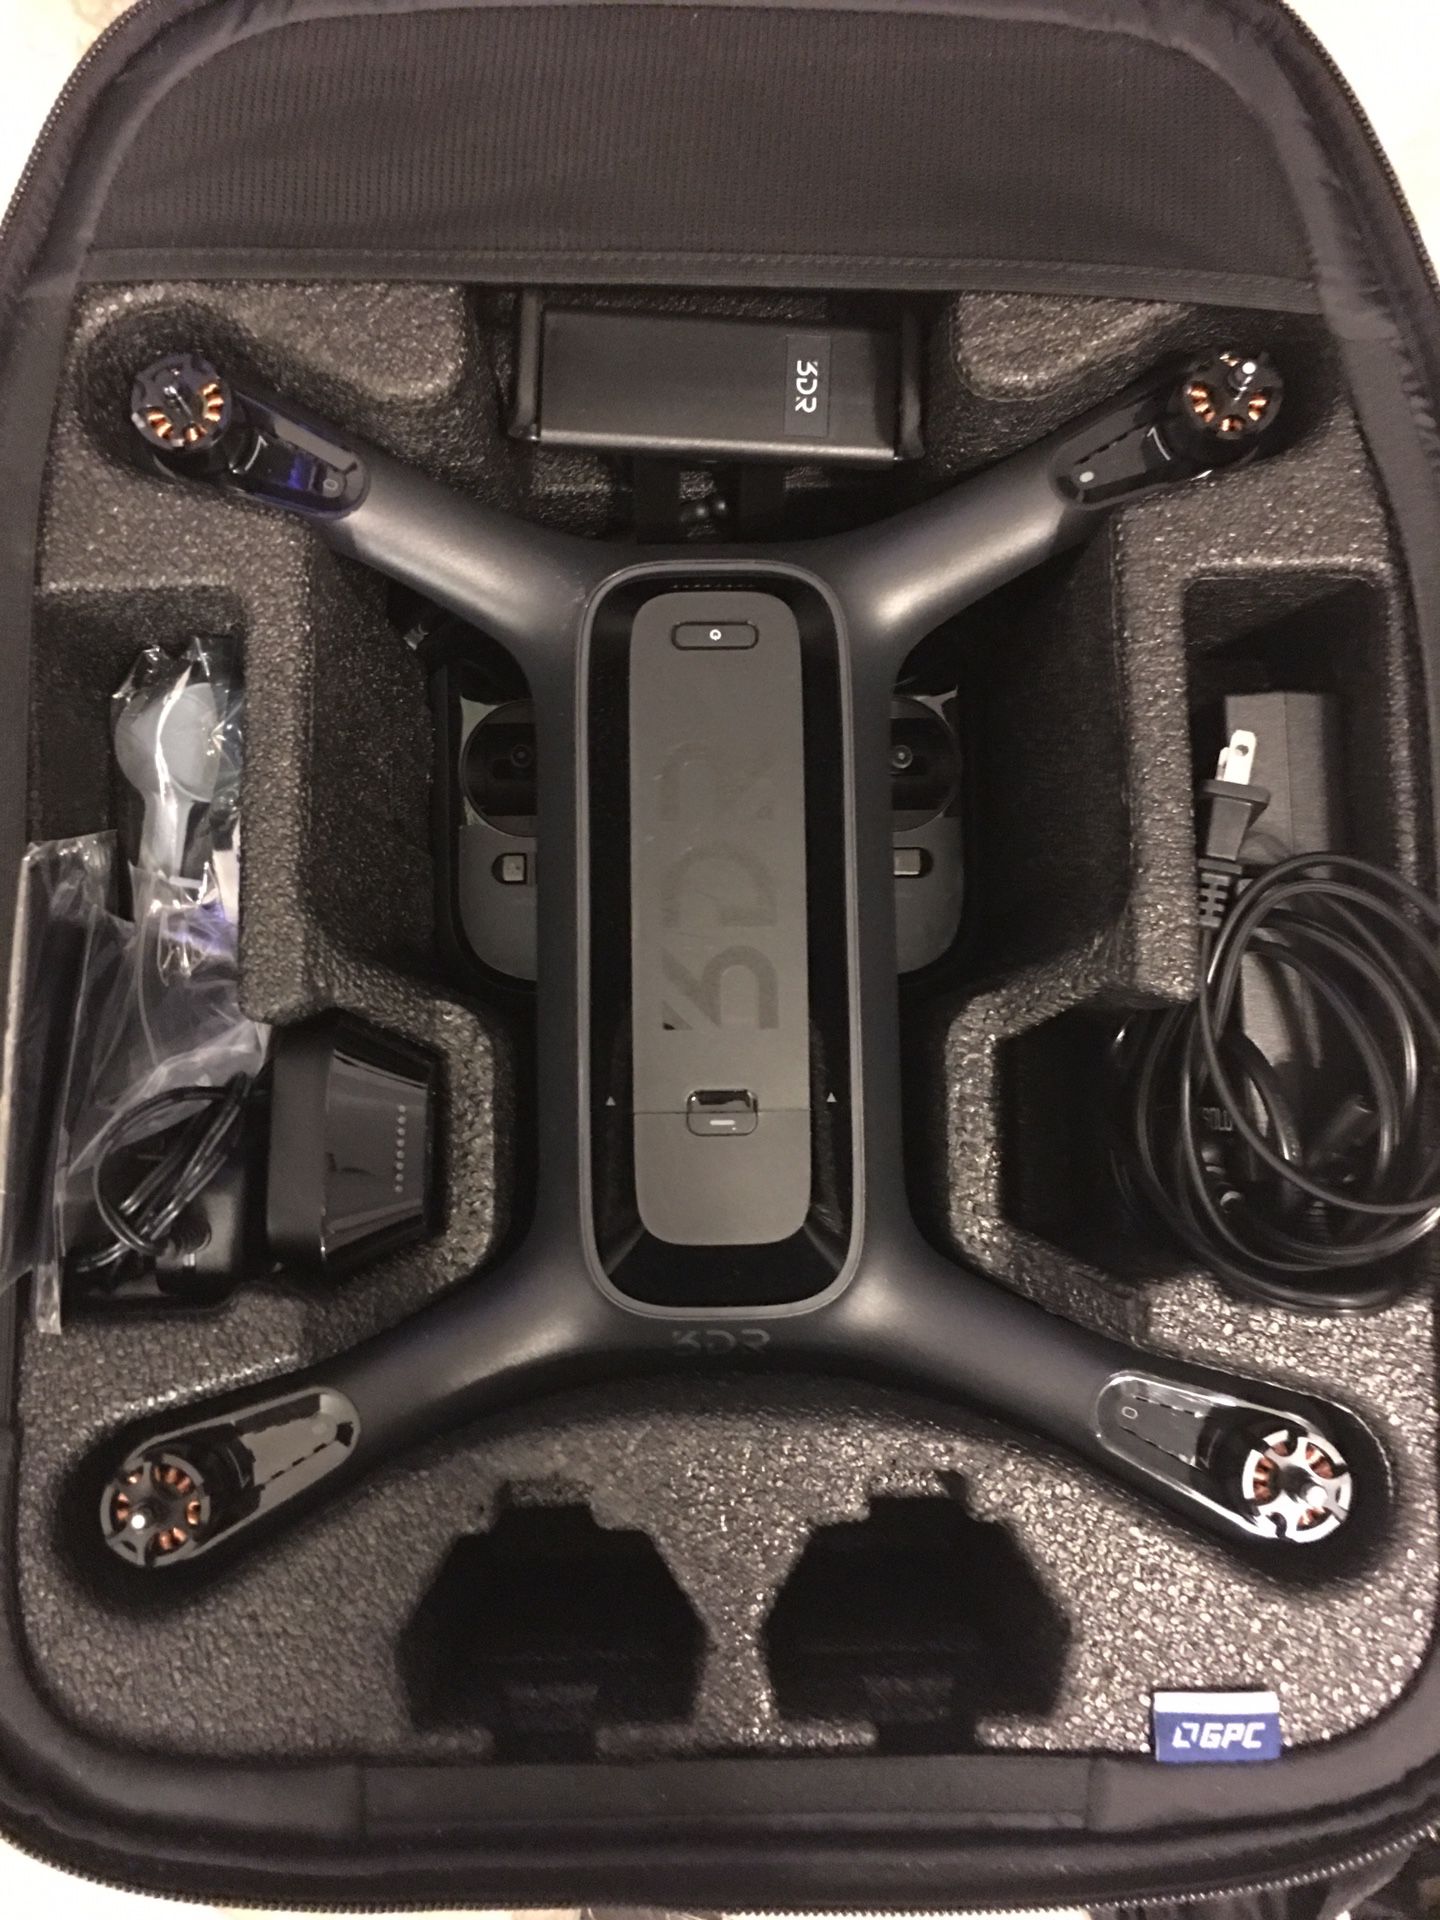 3DR Solo Drone Quadcopter - immaculate condition